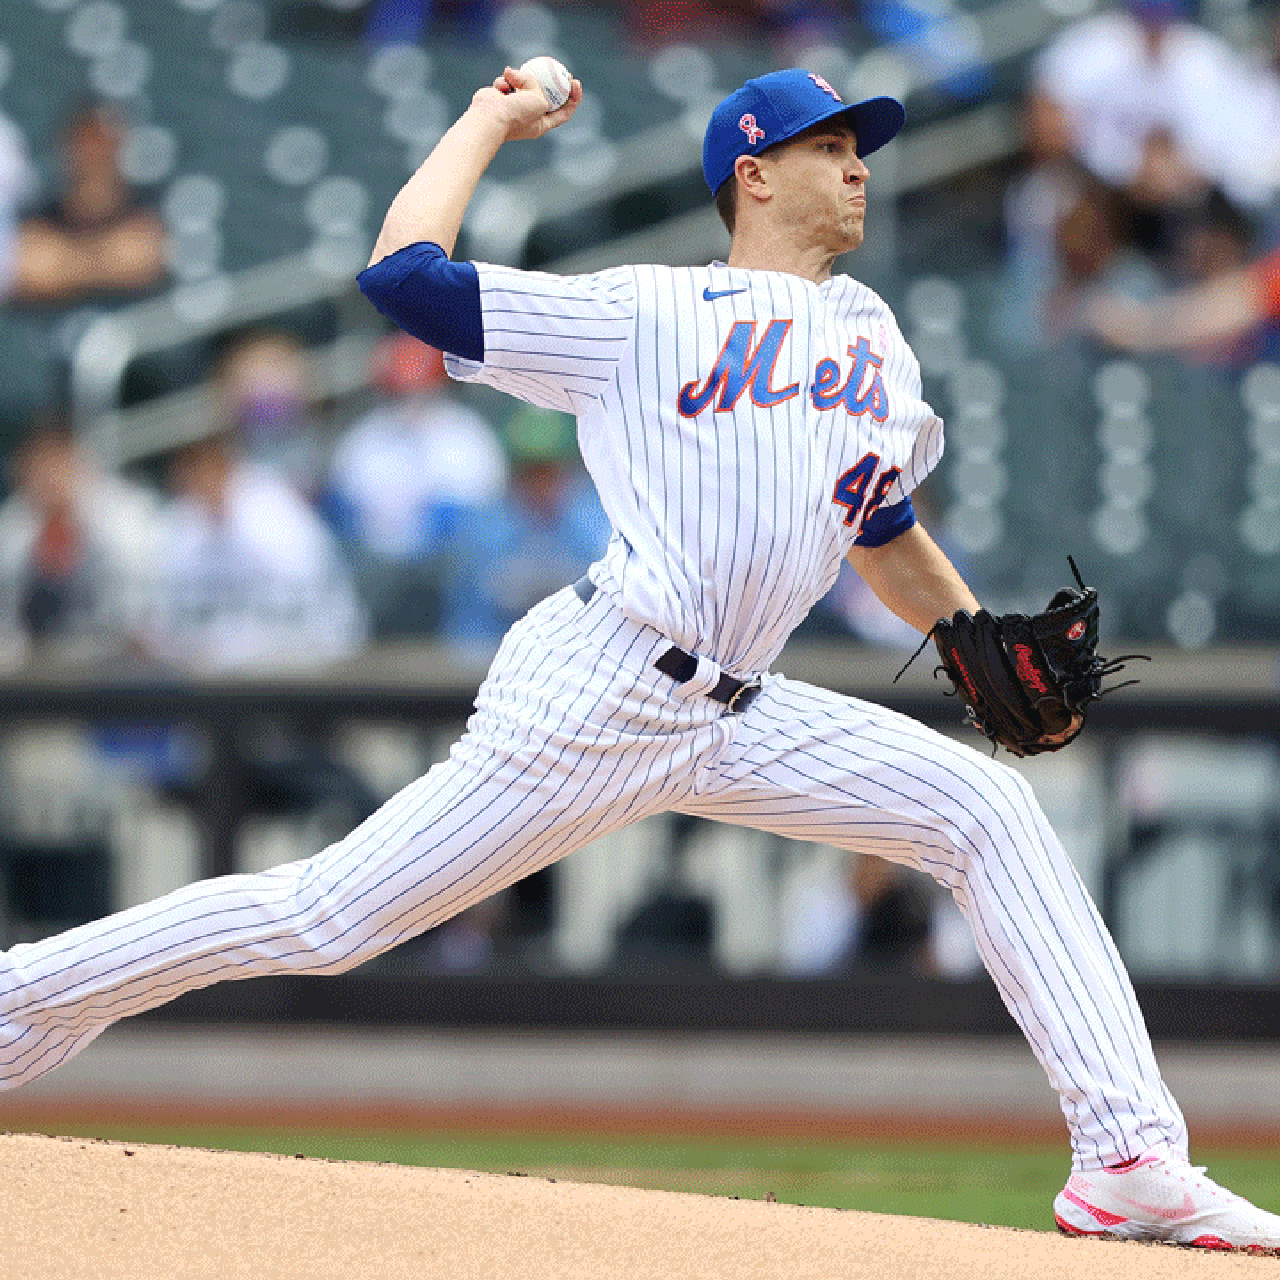 New York Mets ace Jacob deGrom throws 4 IP, K's 4 in third rehab